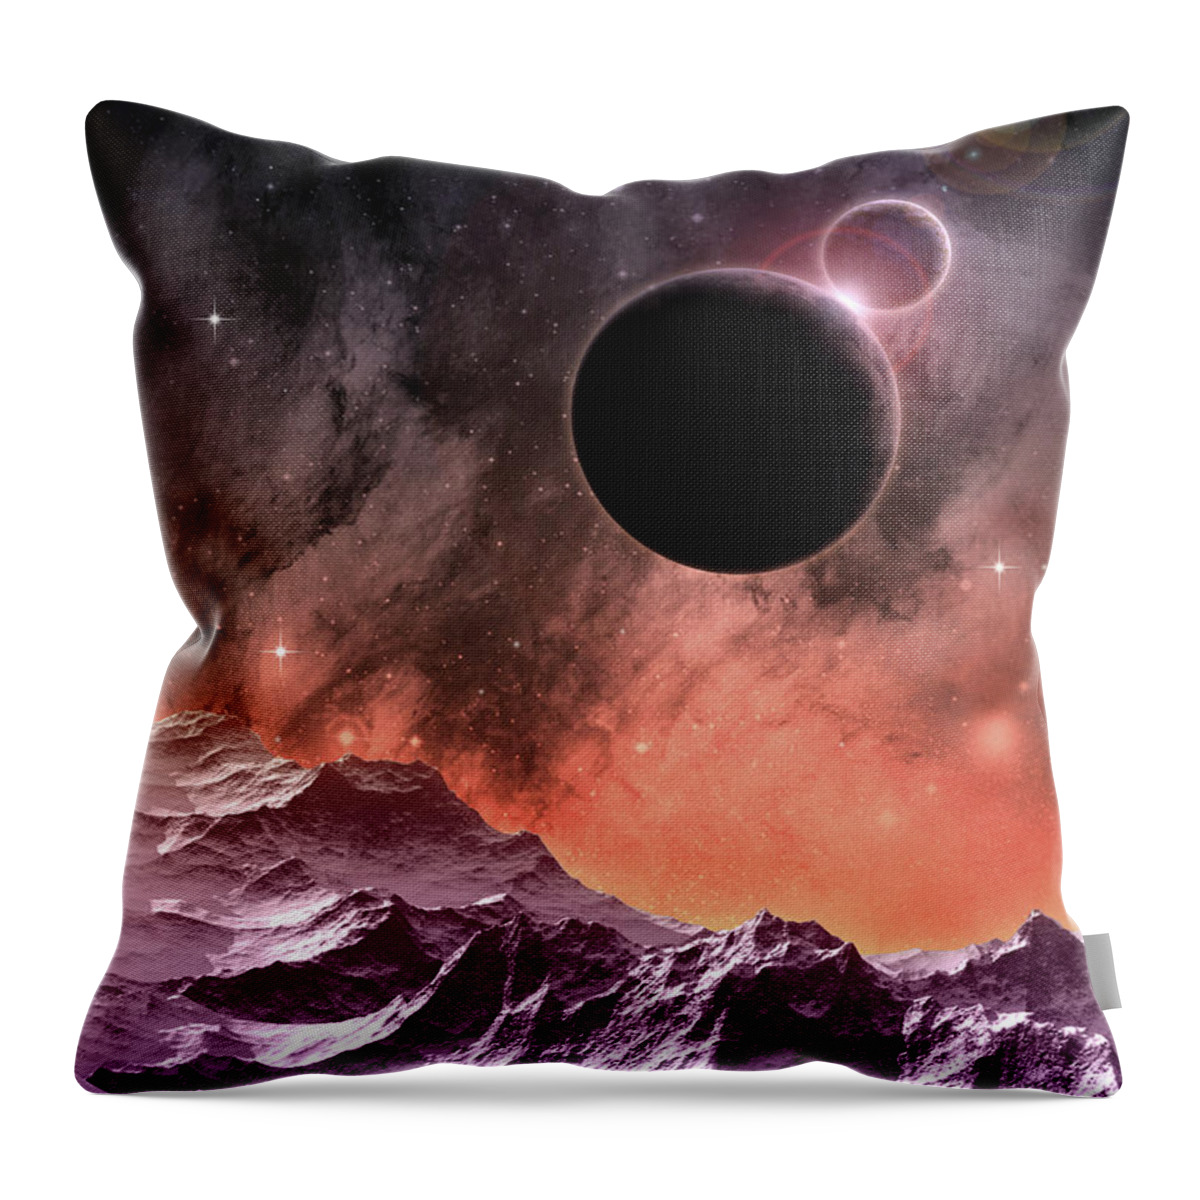 Space Throw Pillow featuring the digital art Cosmic Landscape by Phil Perkins